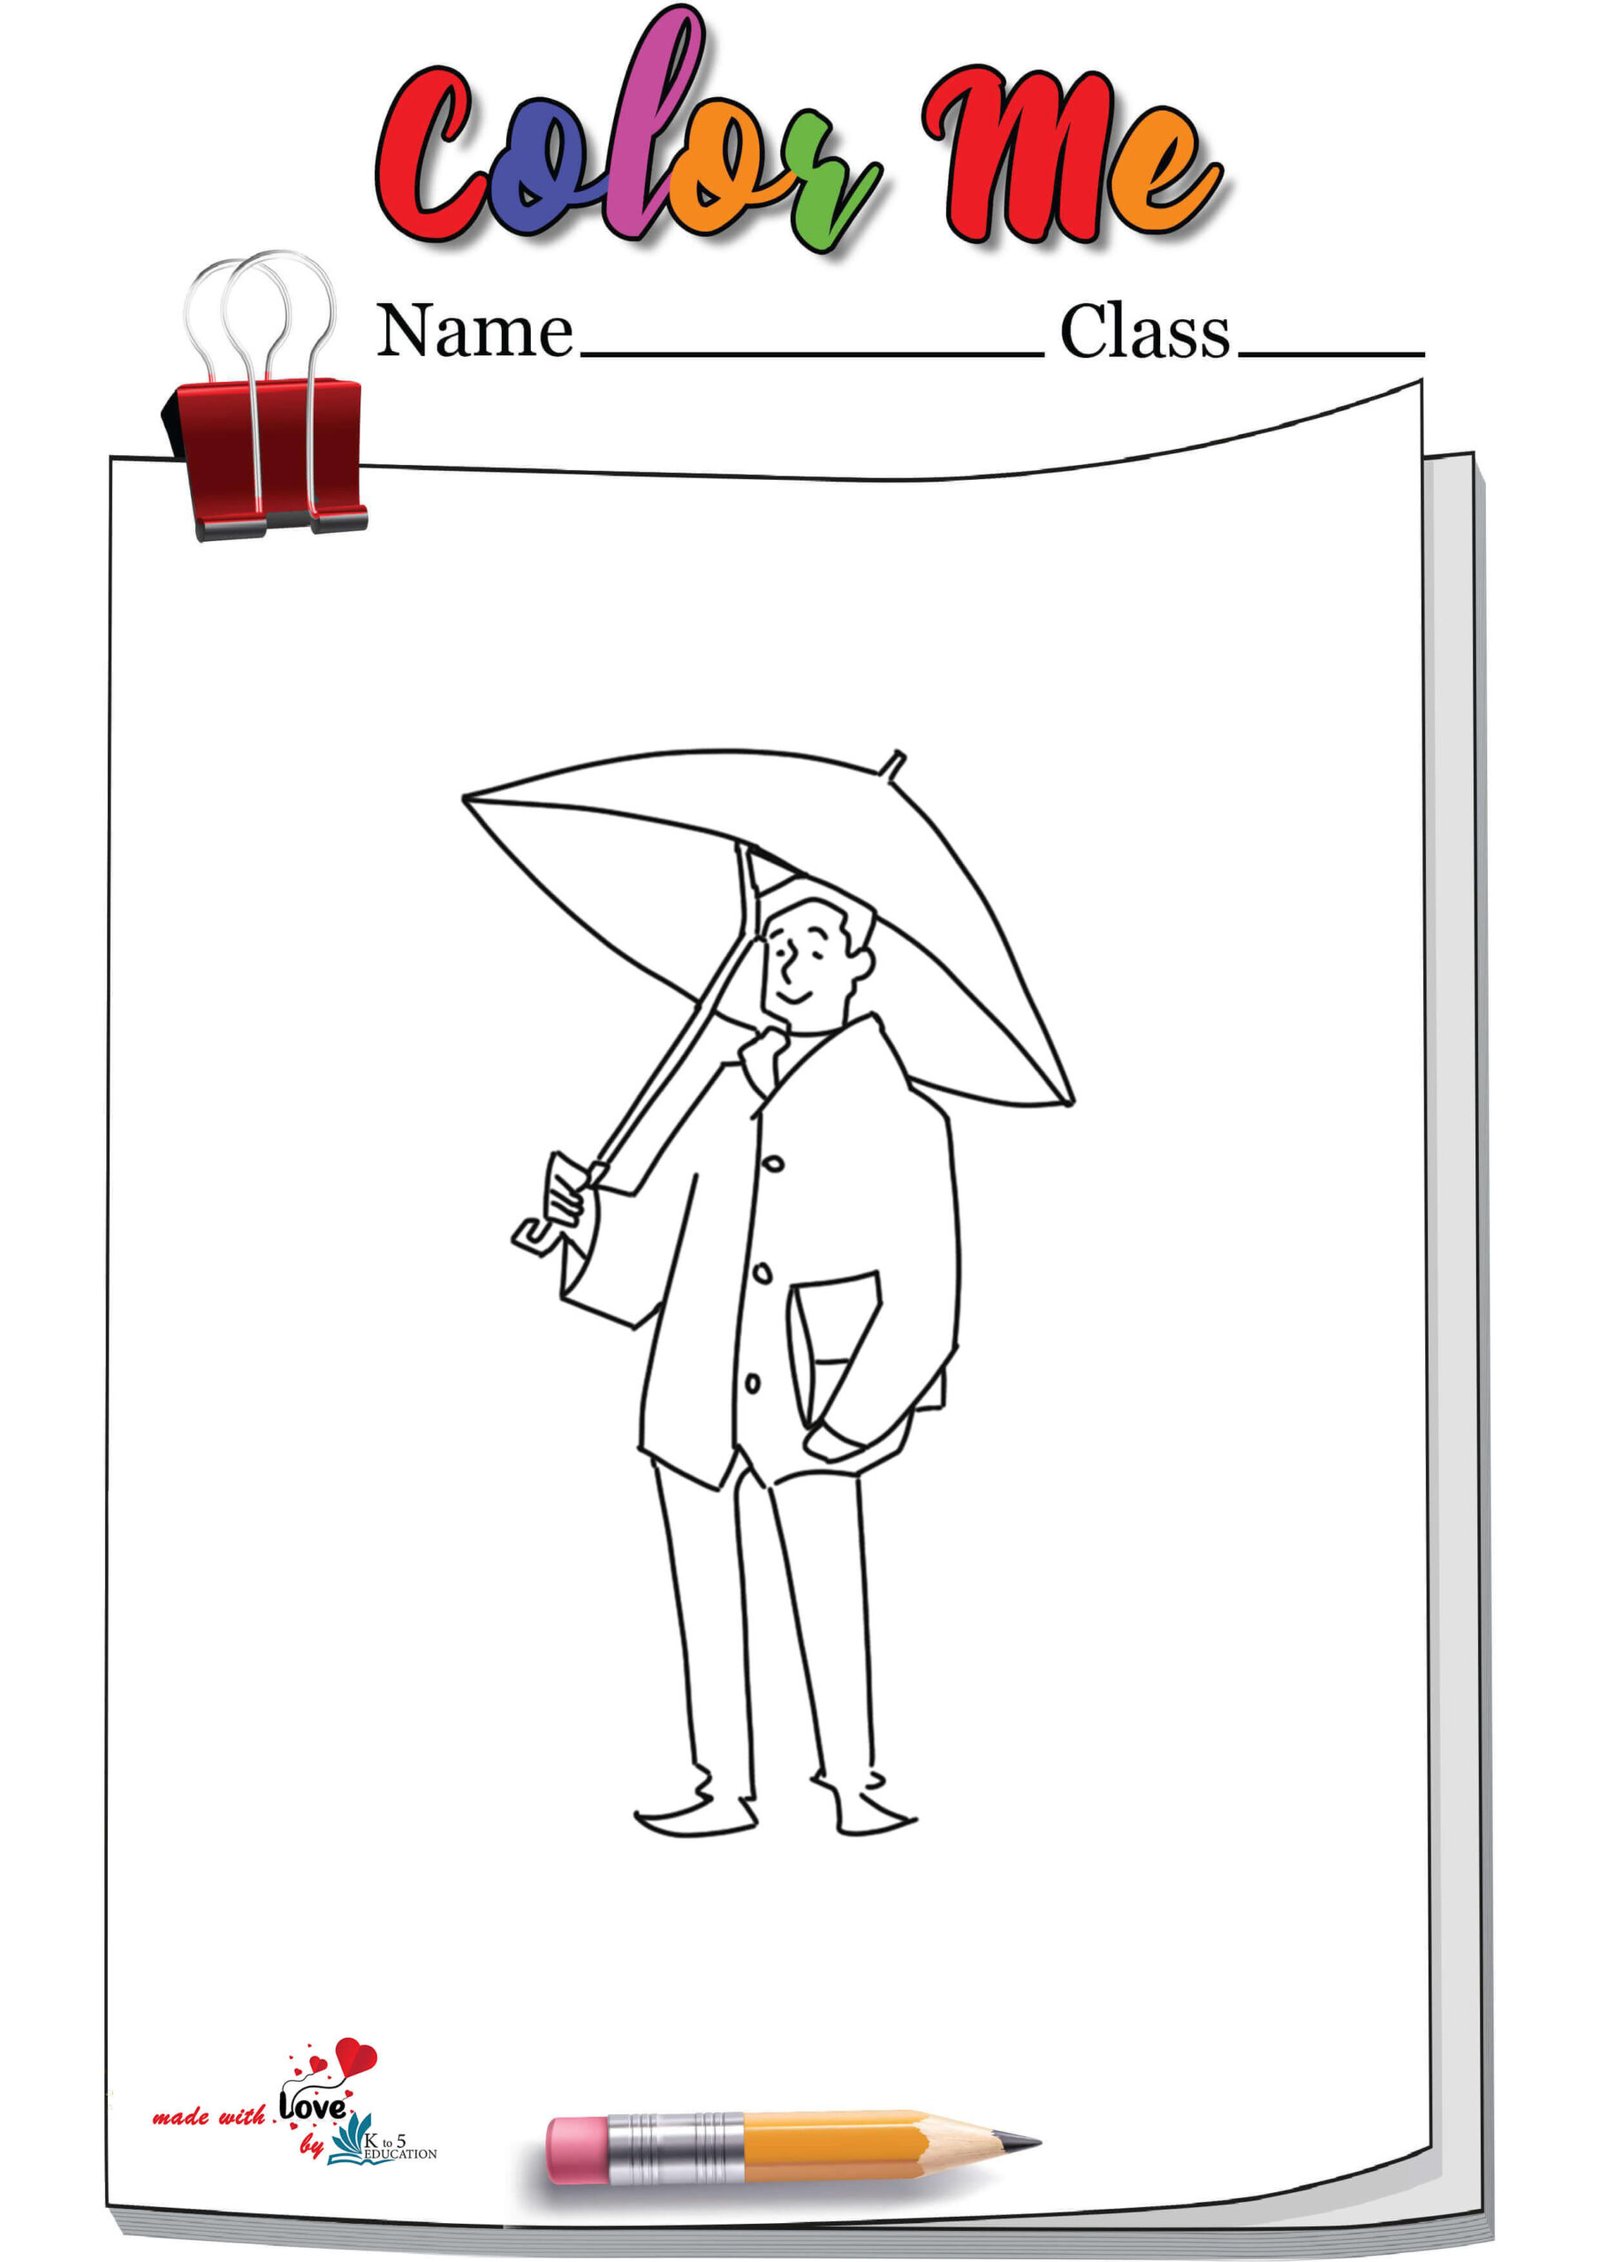 A Man Carrying Umbrella Coloring Page